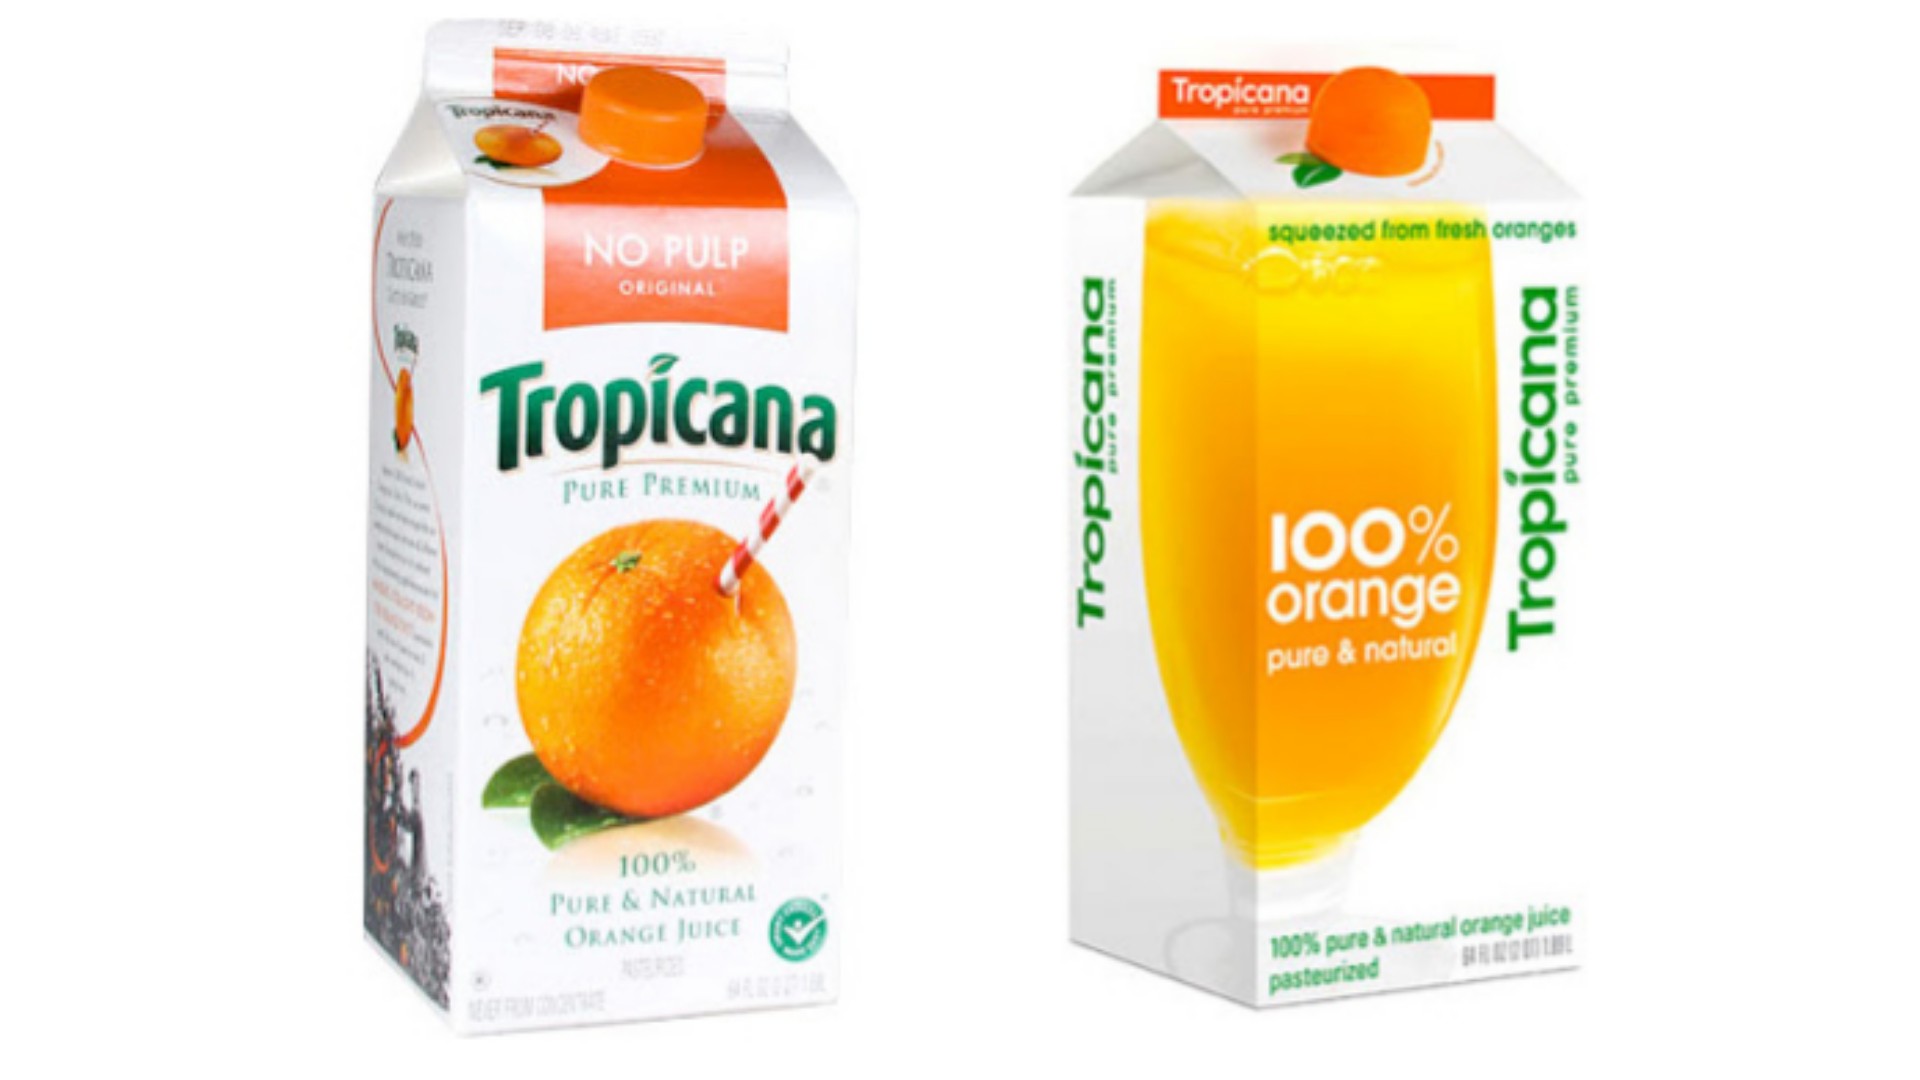 Tropicana’s Packaging Redesign Failure​ - Learn case study